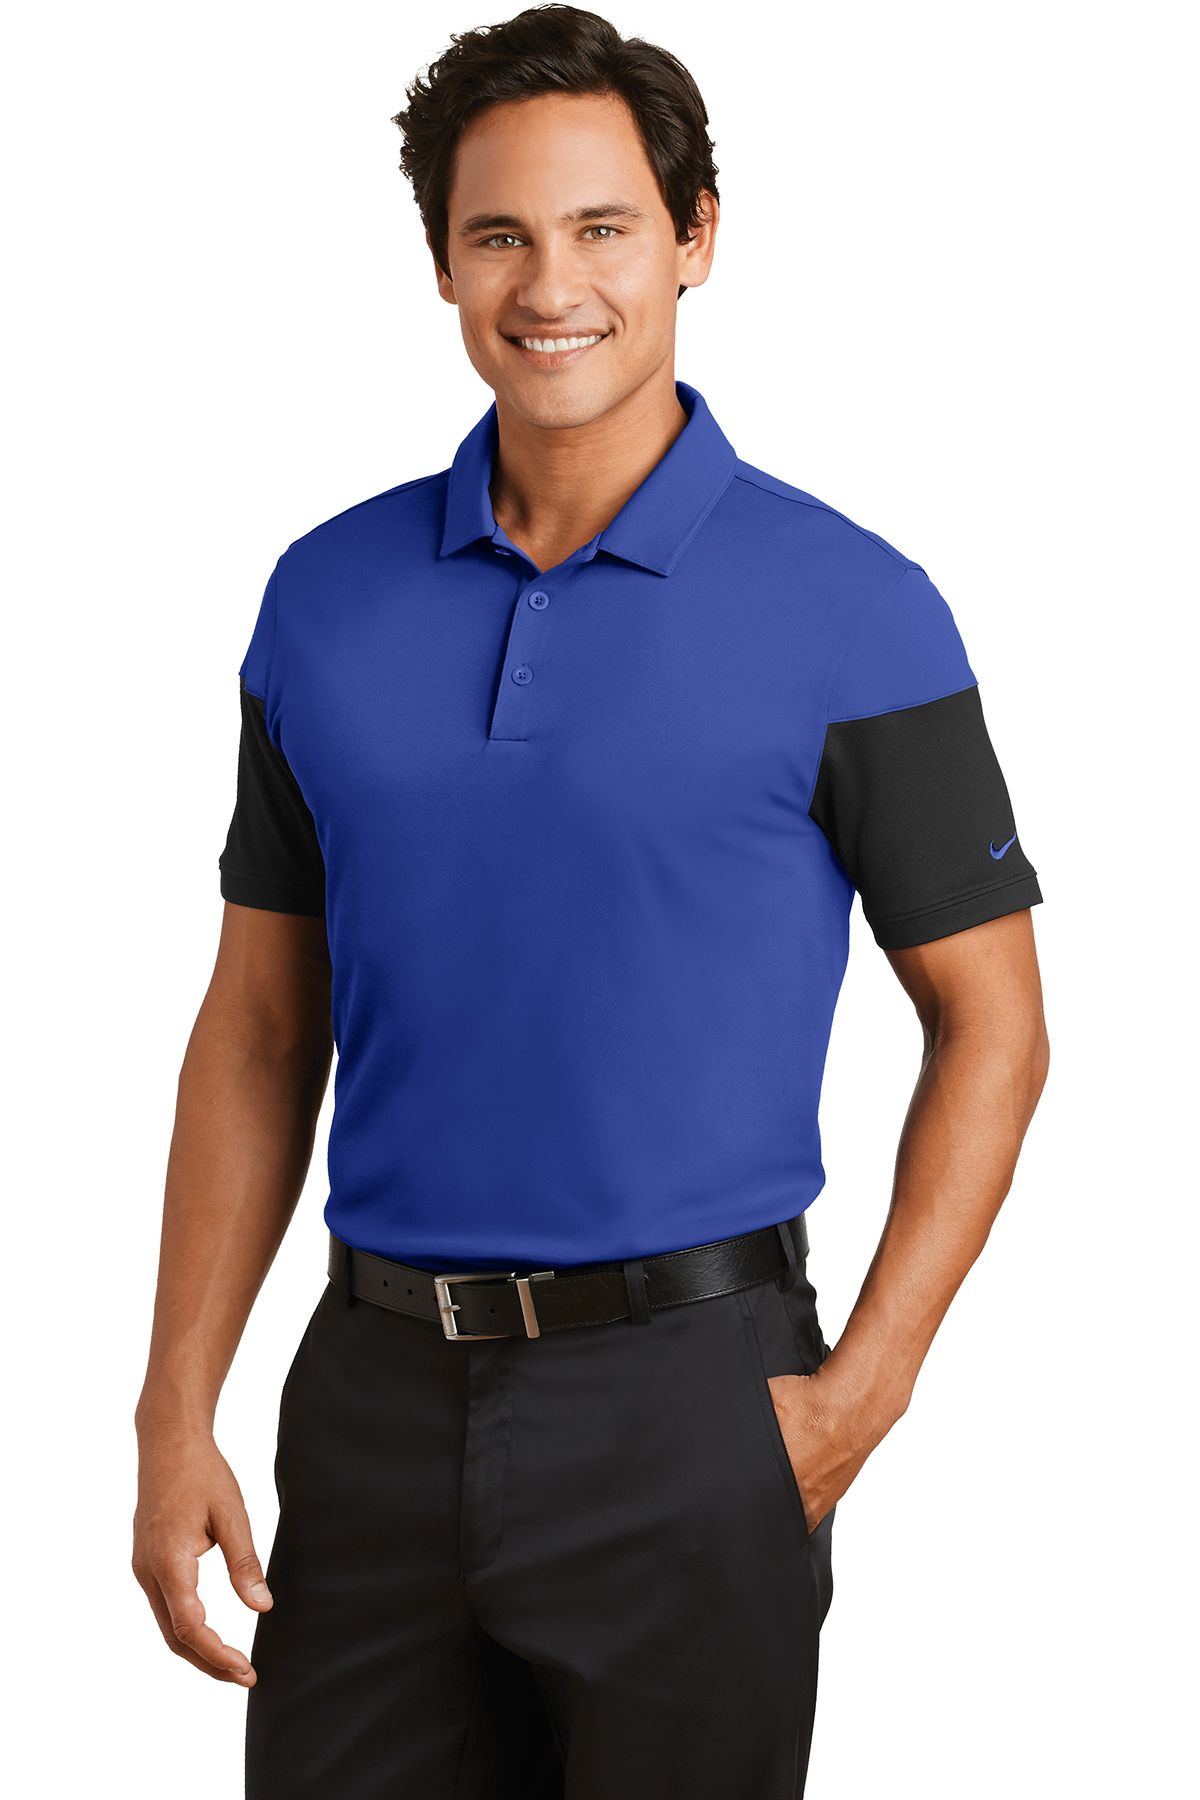 Nike Dri-FIT Sleeve Colorblock Modern Fit Polo | Product | SanMar